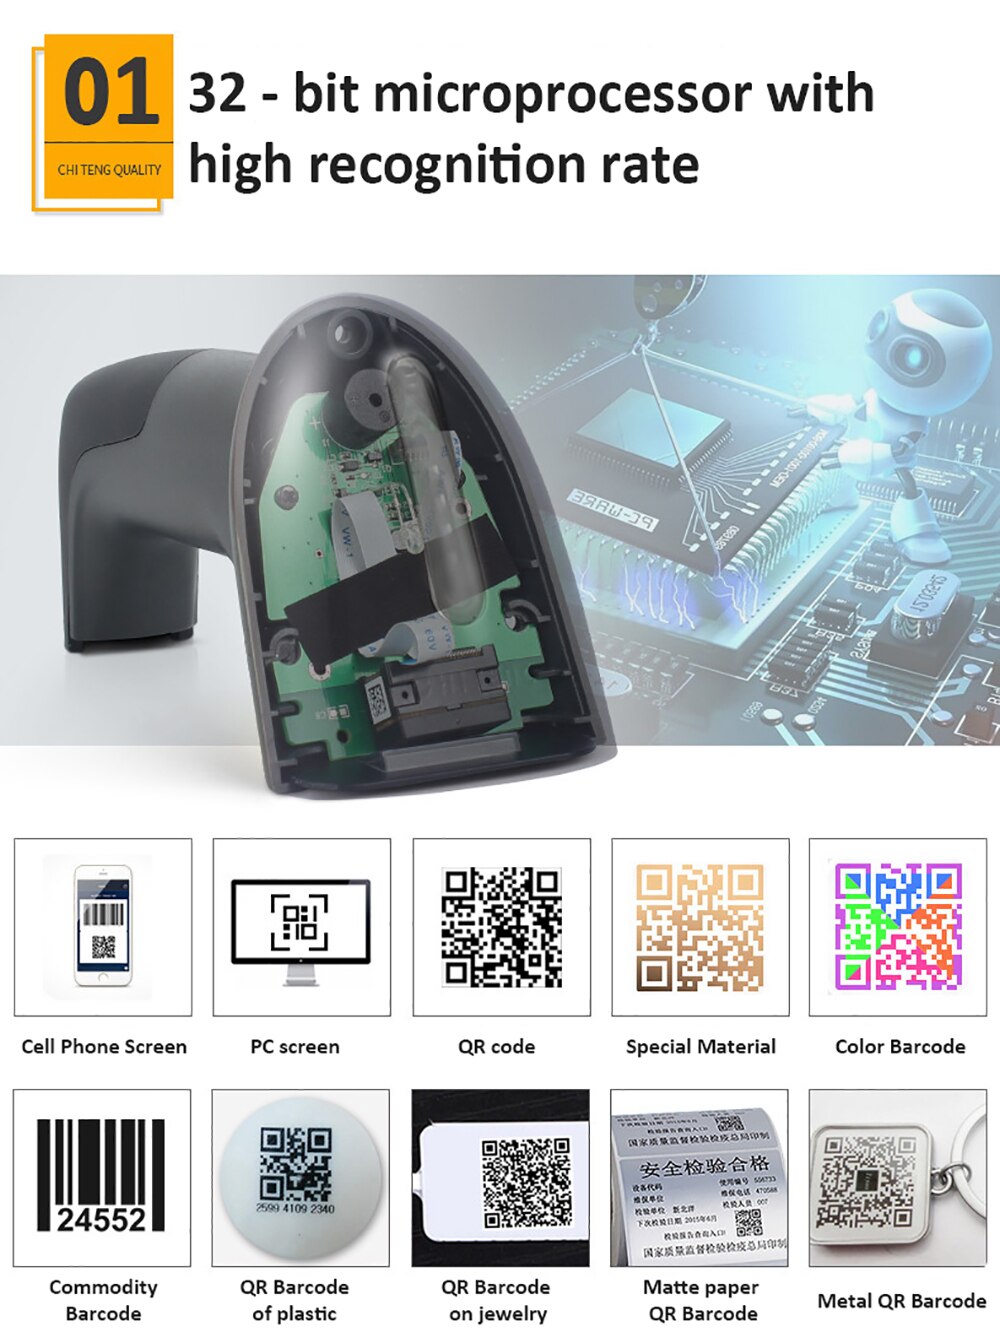 JR650 Wired Barcode Scanner Handheld for Mobile Payment Computer Screen Wechat Scanner Reader Supermarket Retail Store Warehouse